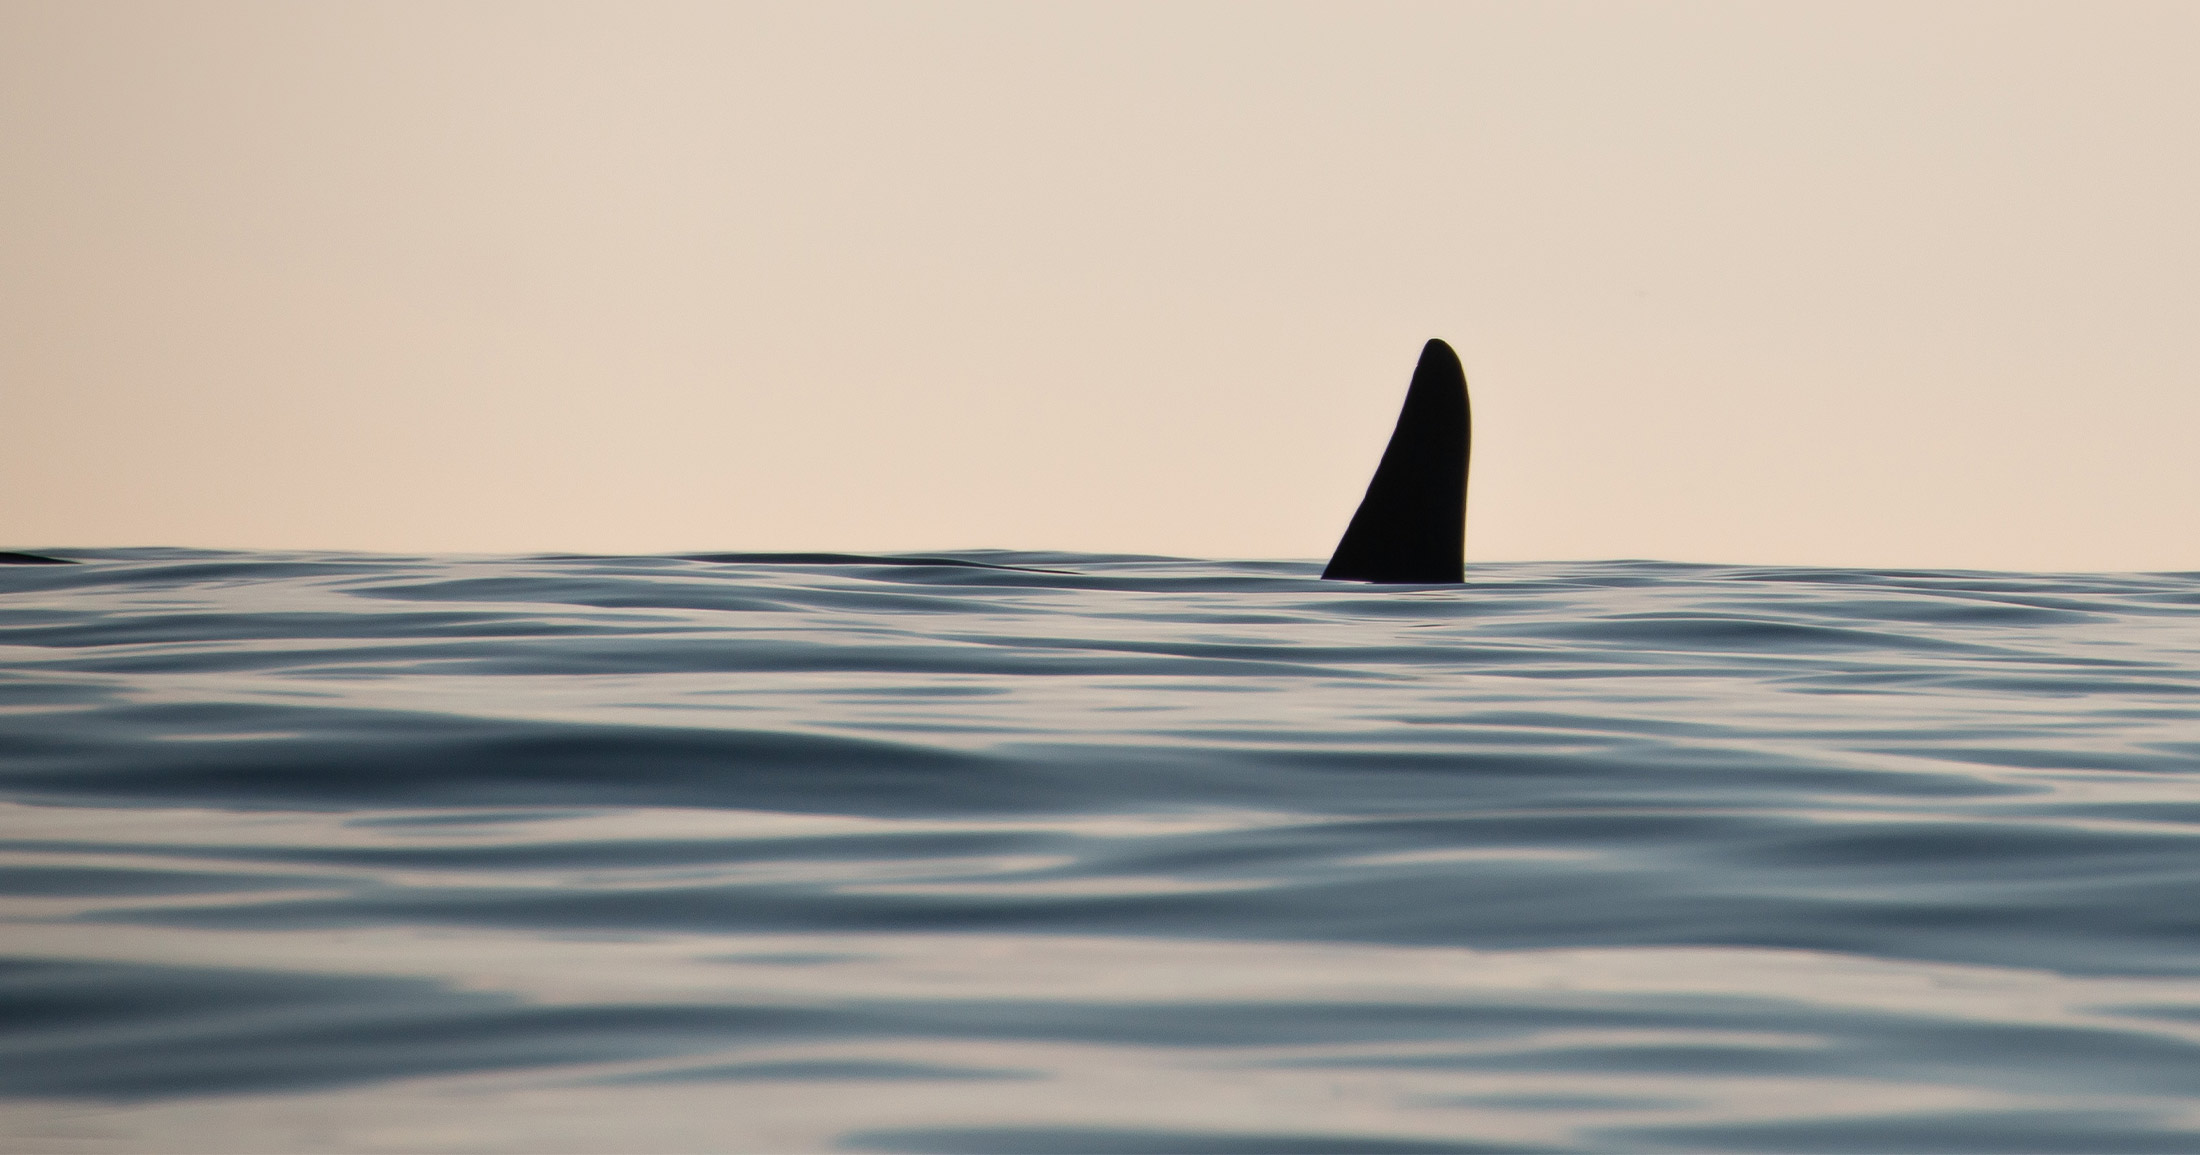 Killer whale dorsal fin coming out of the water during sunset.